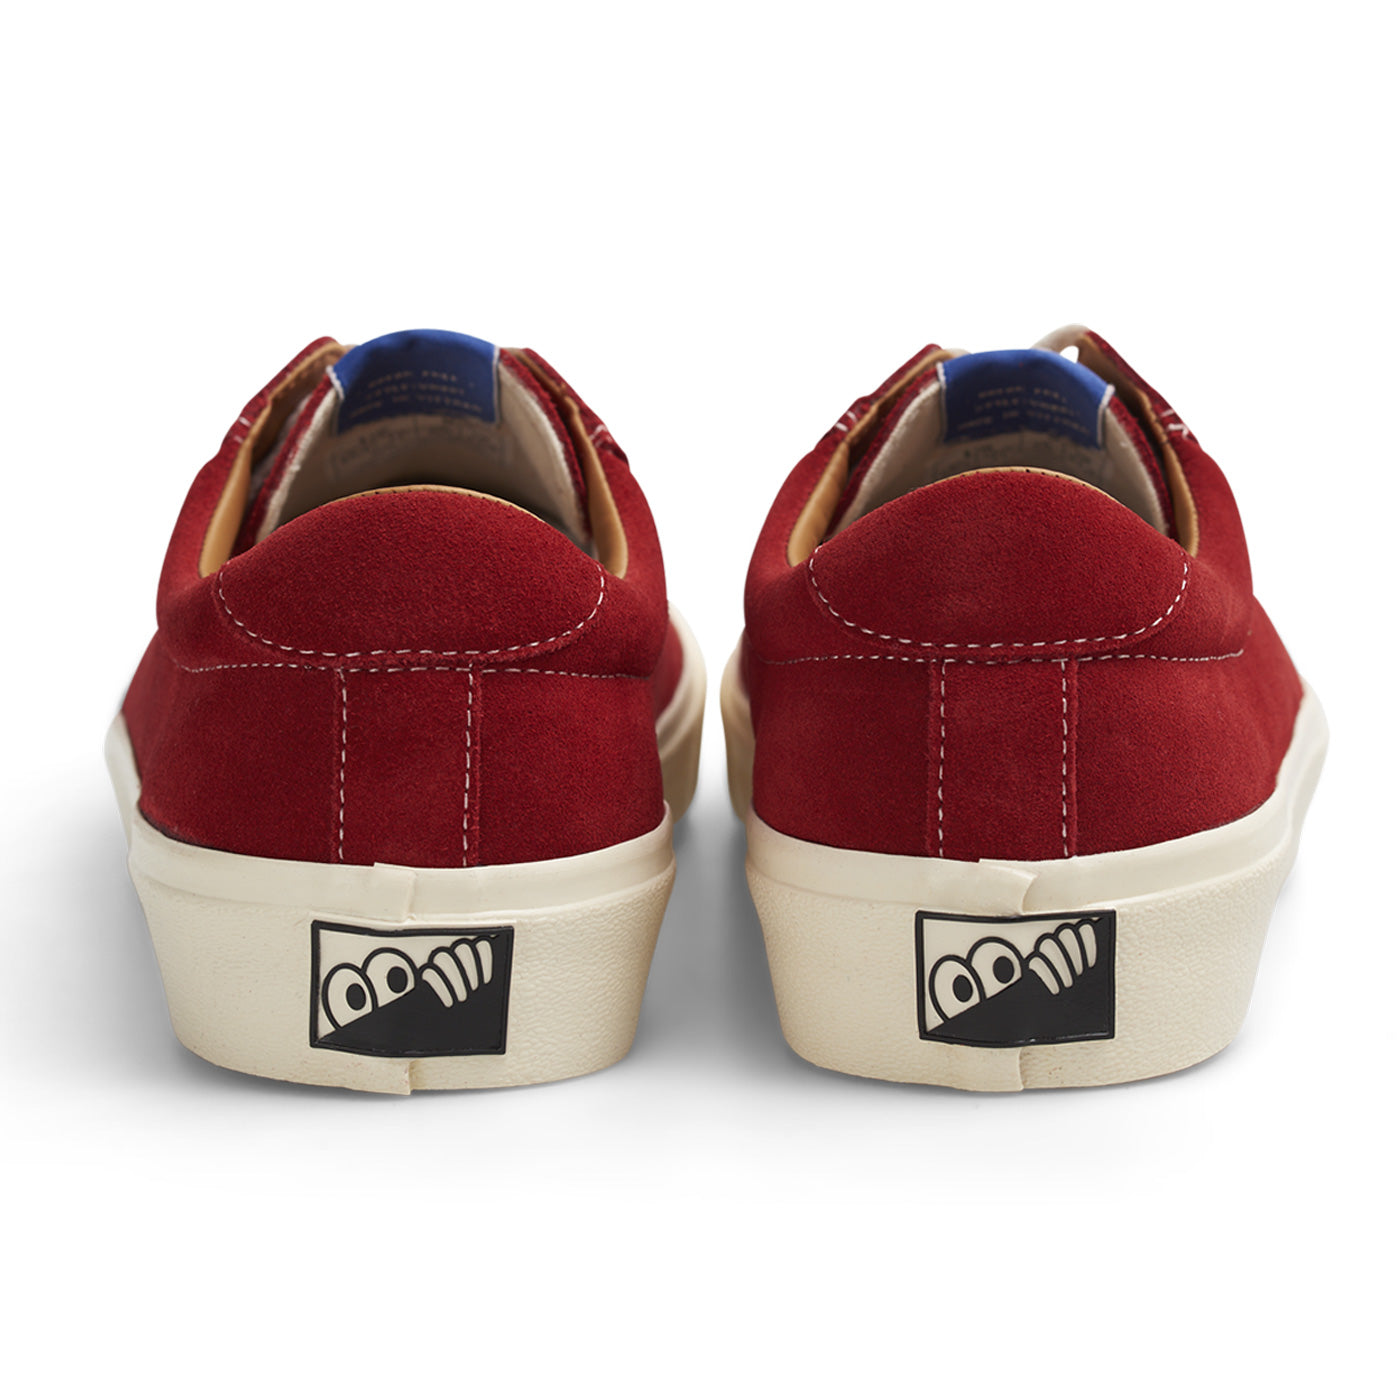 Last Resort AB VM001 Suede LO Shoes - Old Red/White